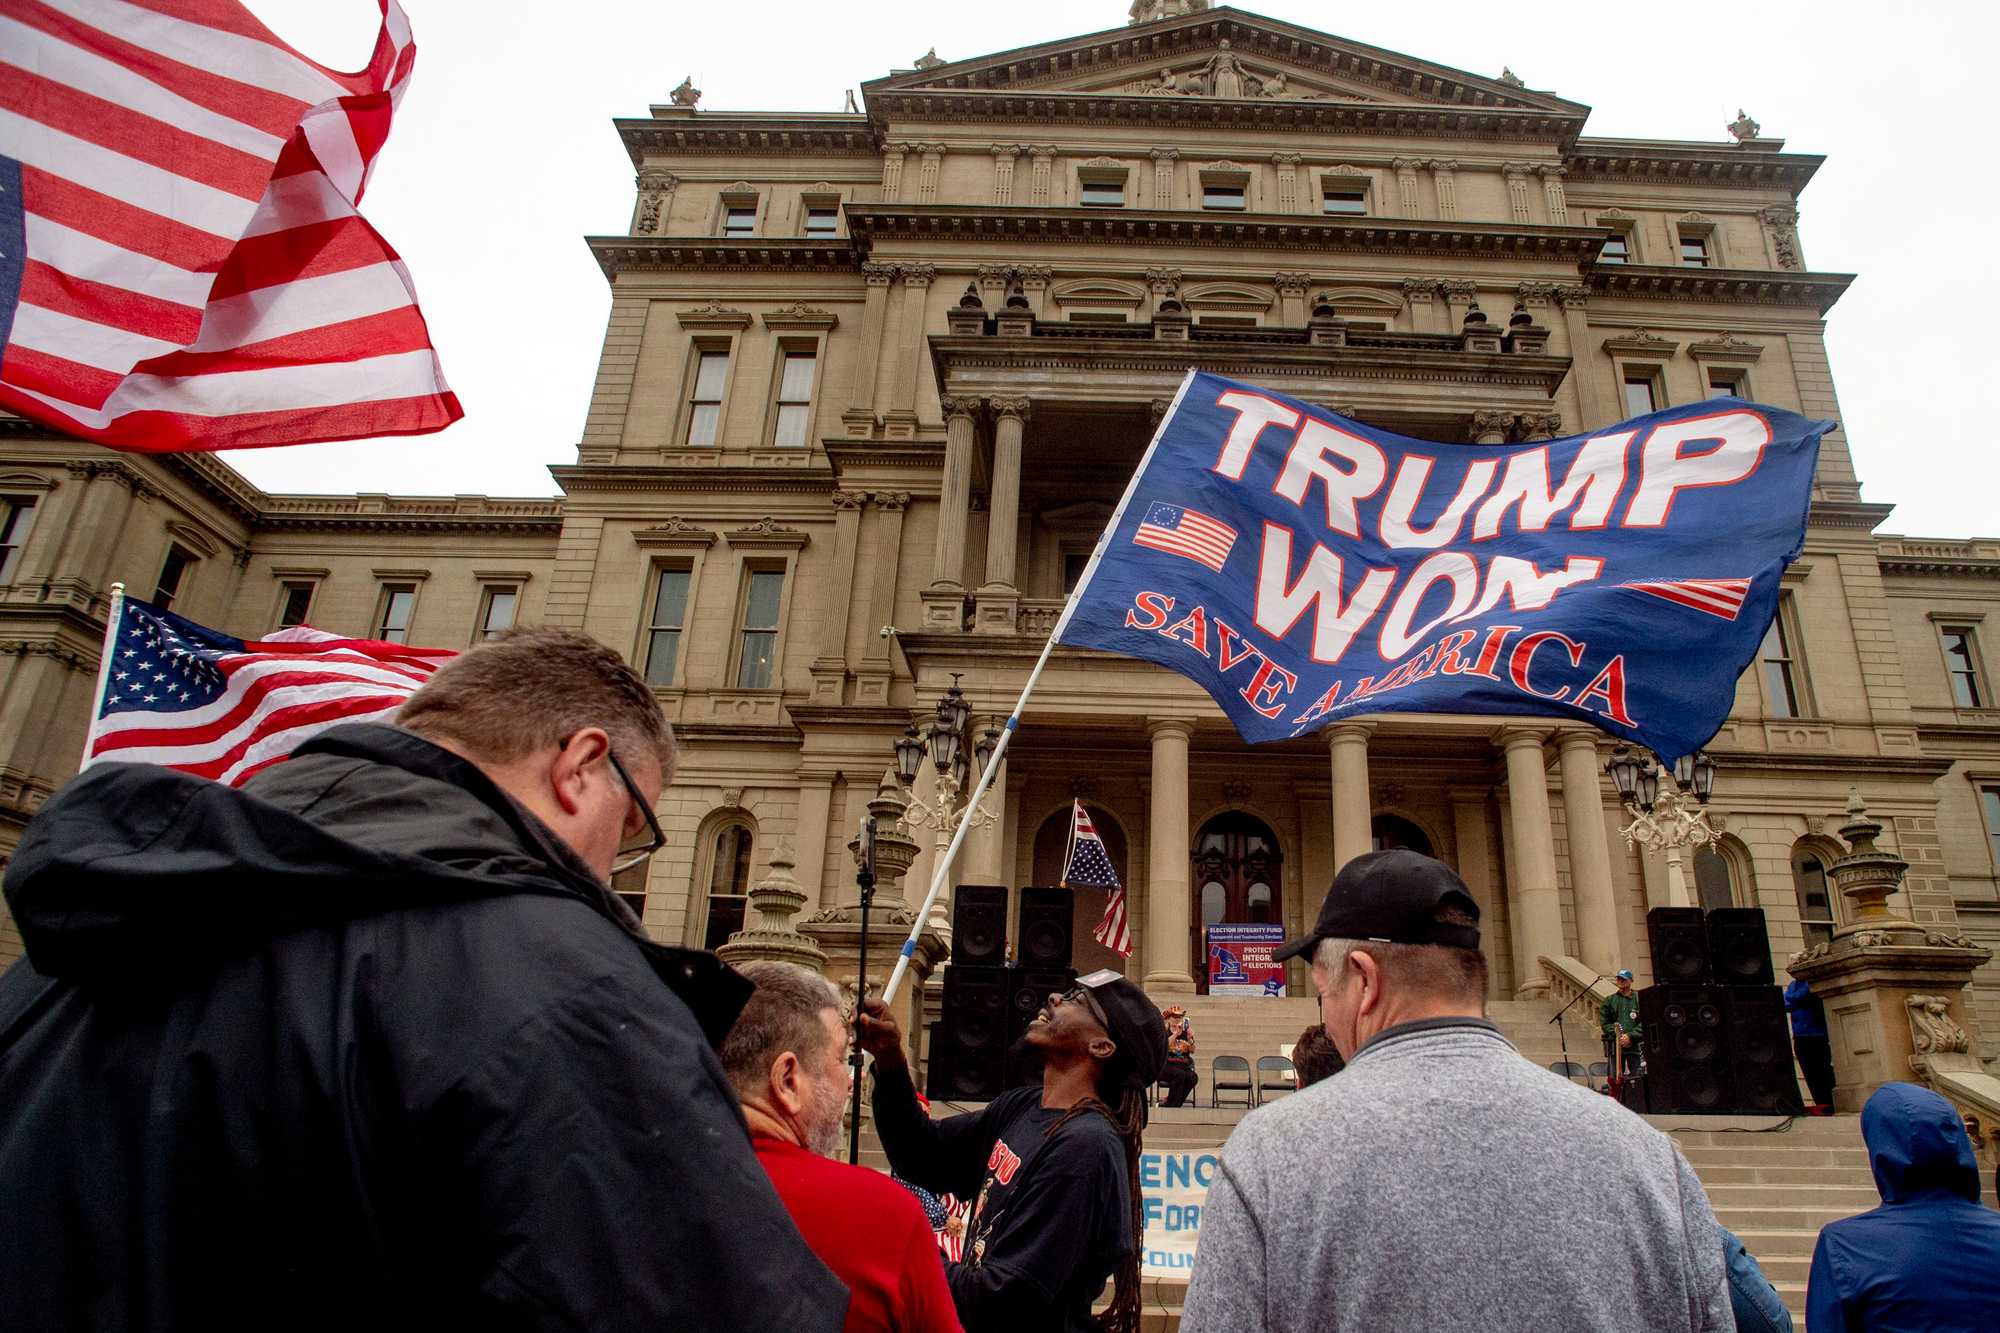 A protester waved a Trump flag during a rally at the Michigan State Capitol on Oct. 12, 2021, in Lansing. The event, organized by a group called Election Integrity Fund and Force, was demanding a "forensic audit" of the state's 2020 presidential election results.